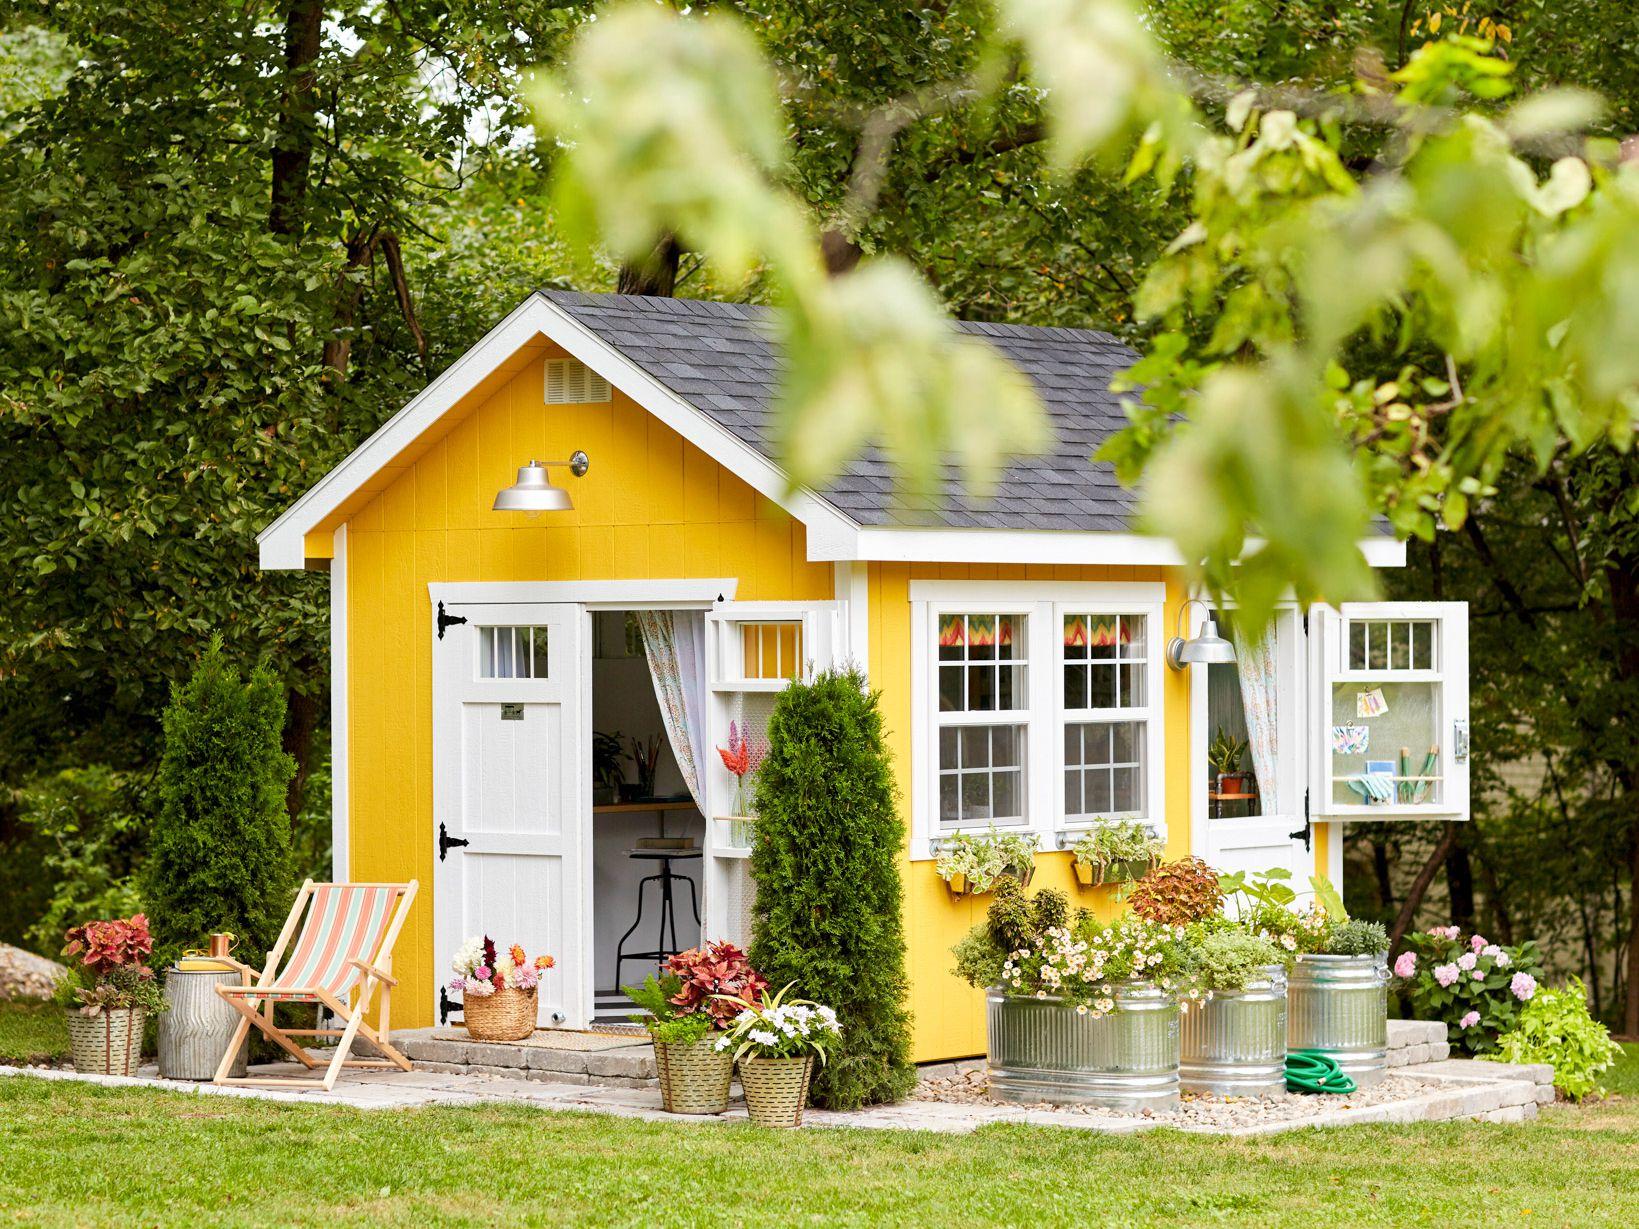 How to Optimize Your Garden Shed to Make it Look Better